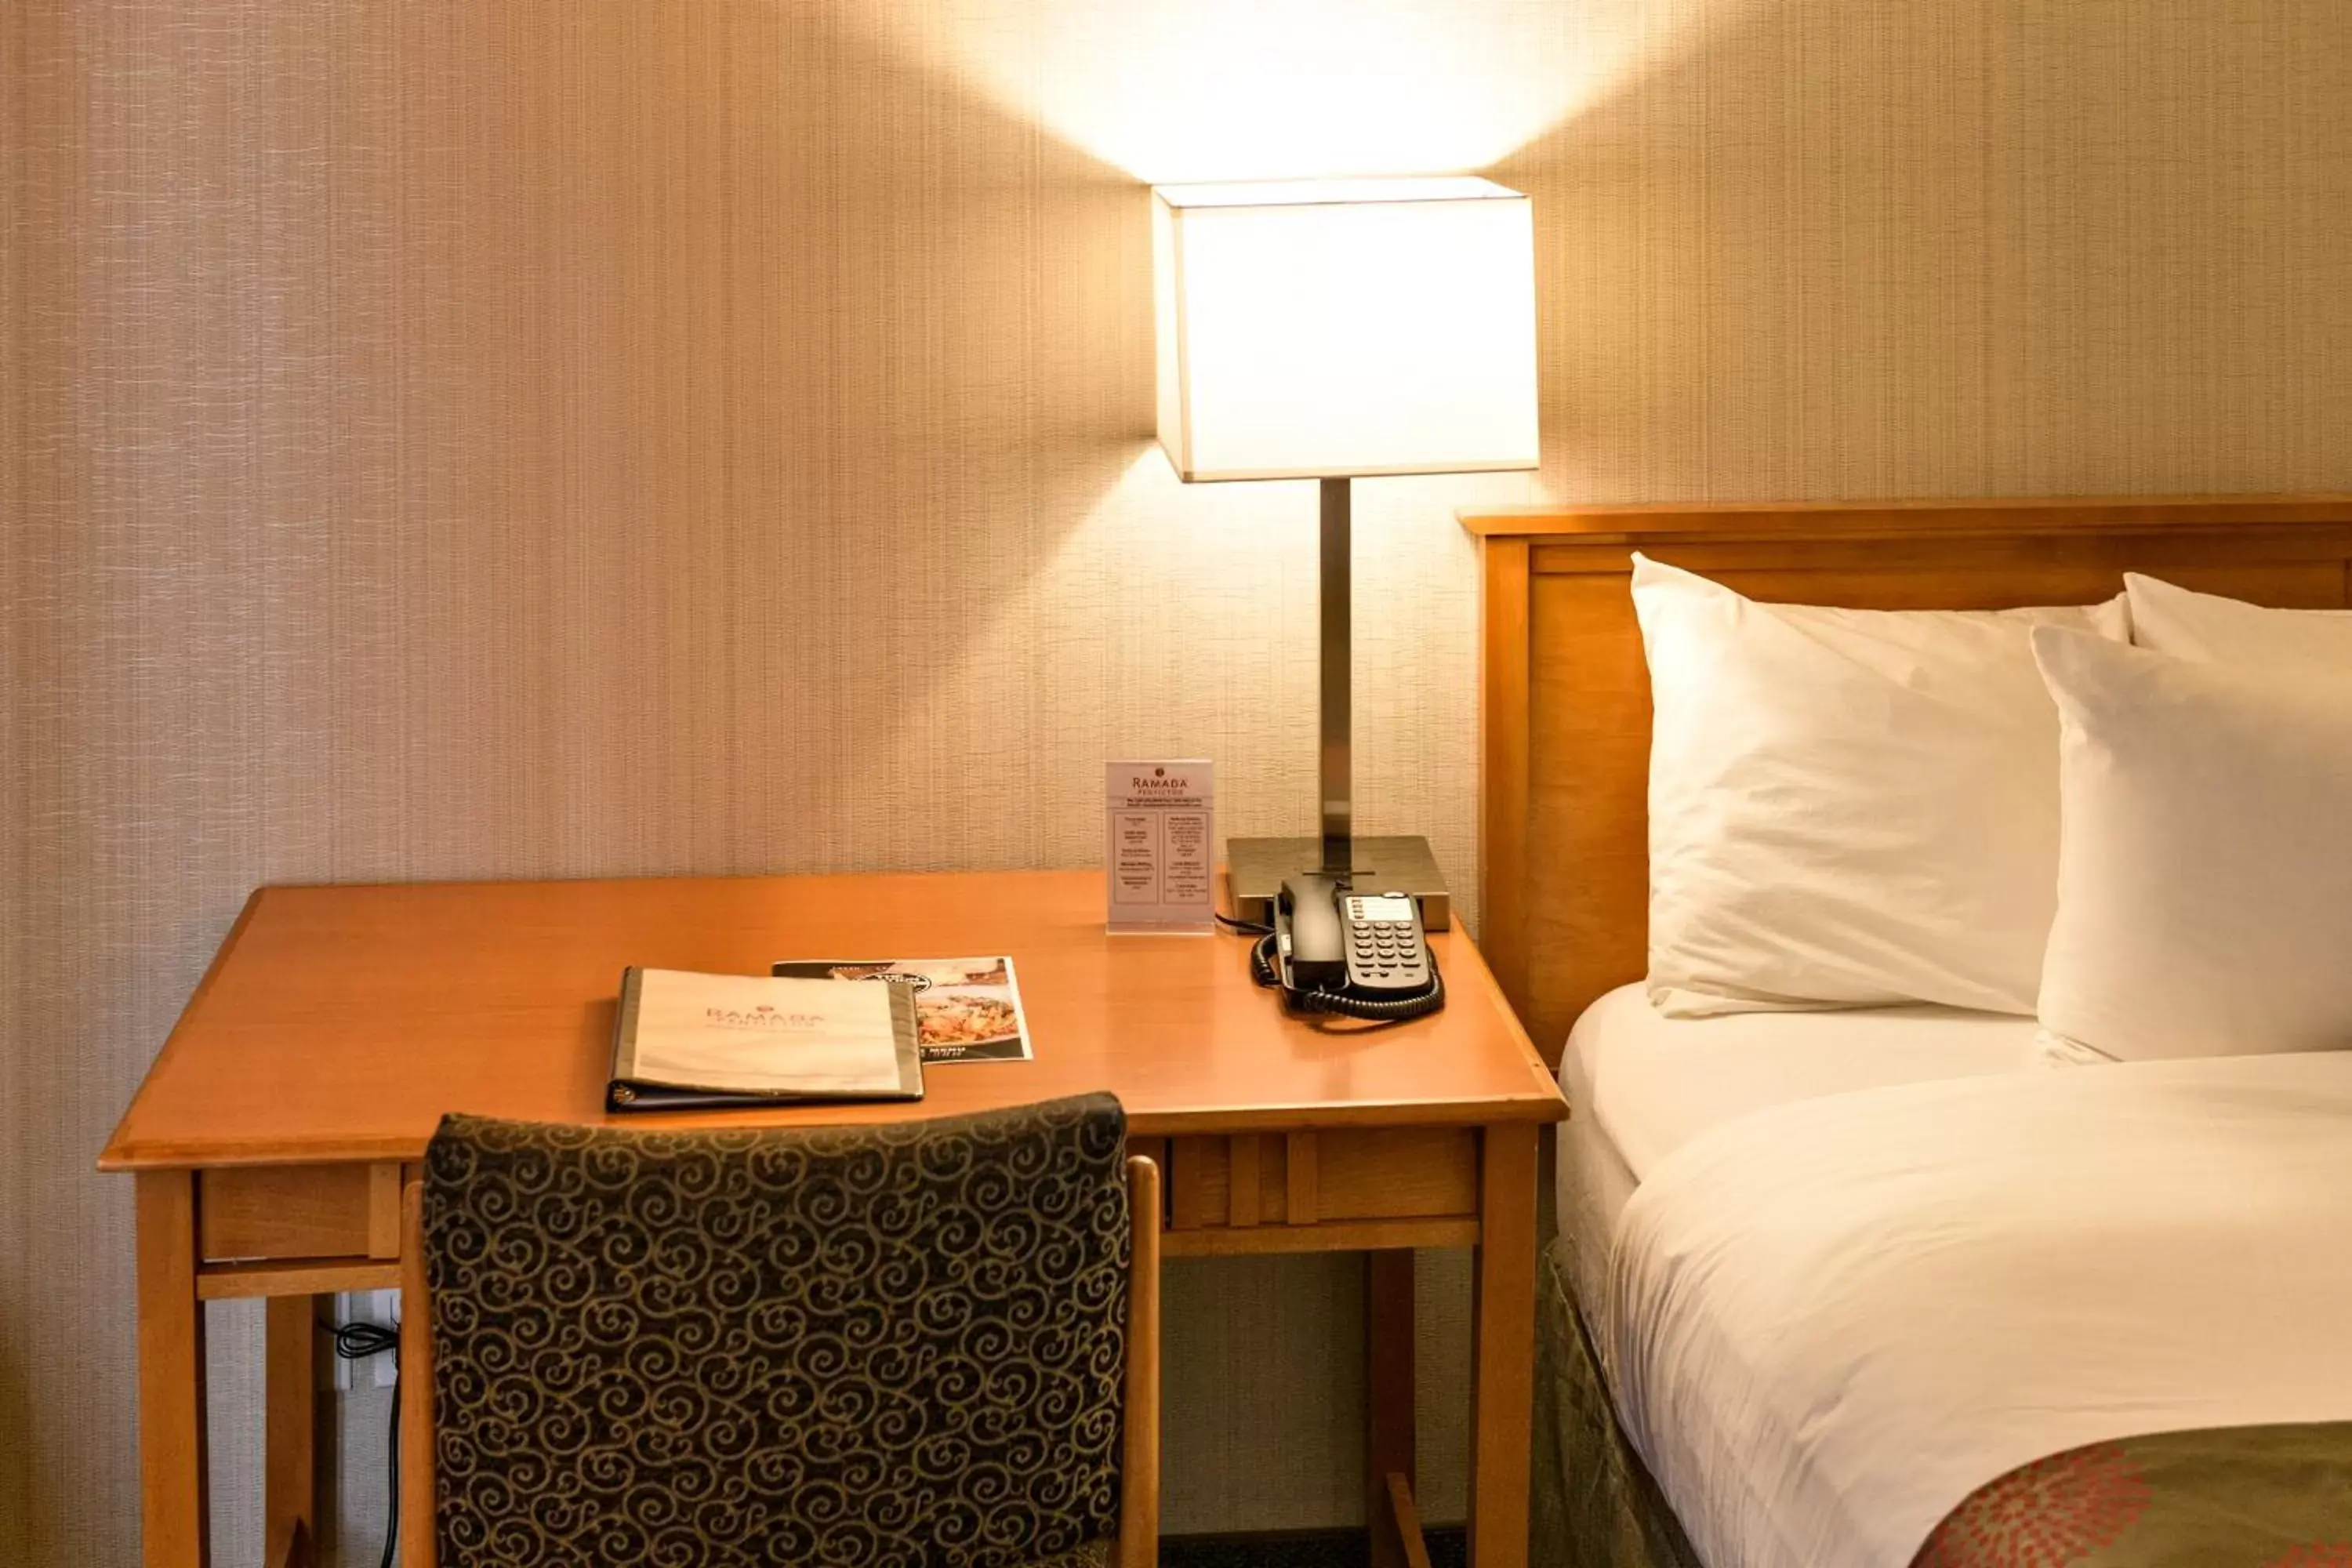 Area and facilities in Ramada by Wyndham Penticton Hotel & Suites